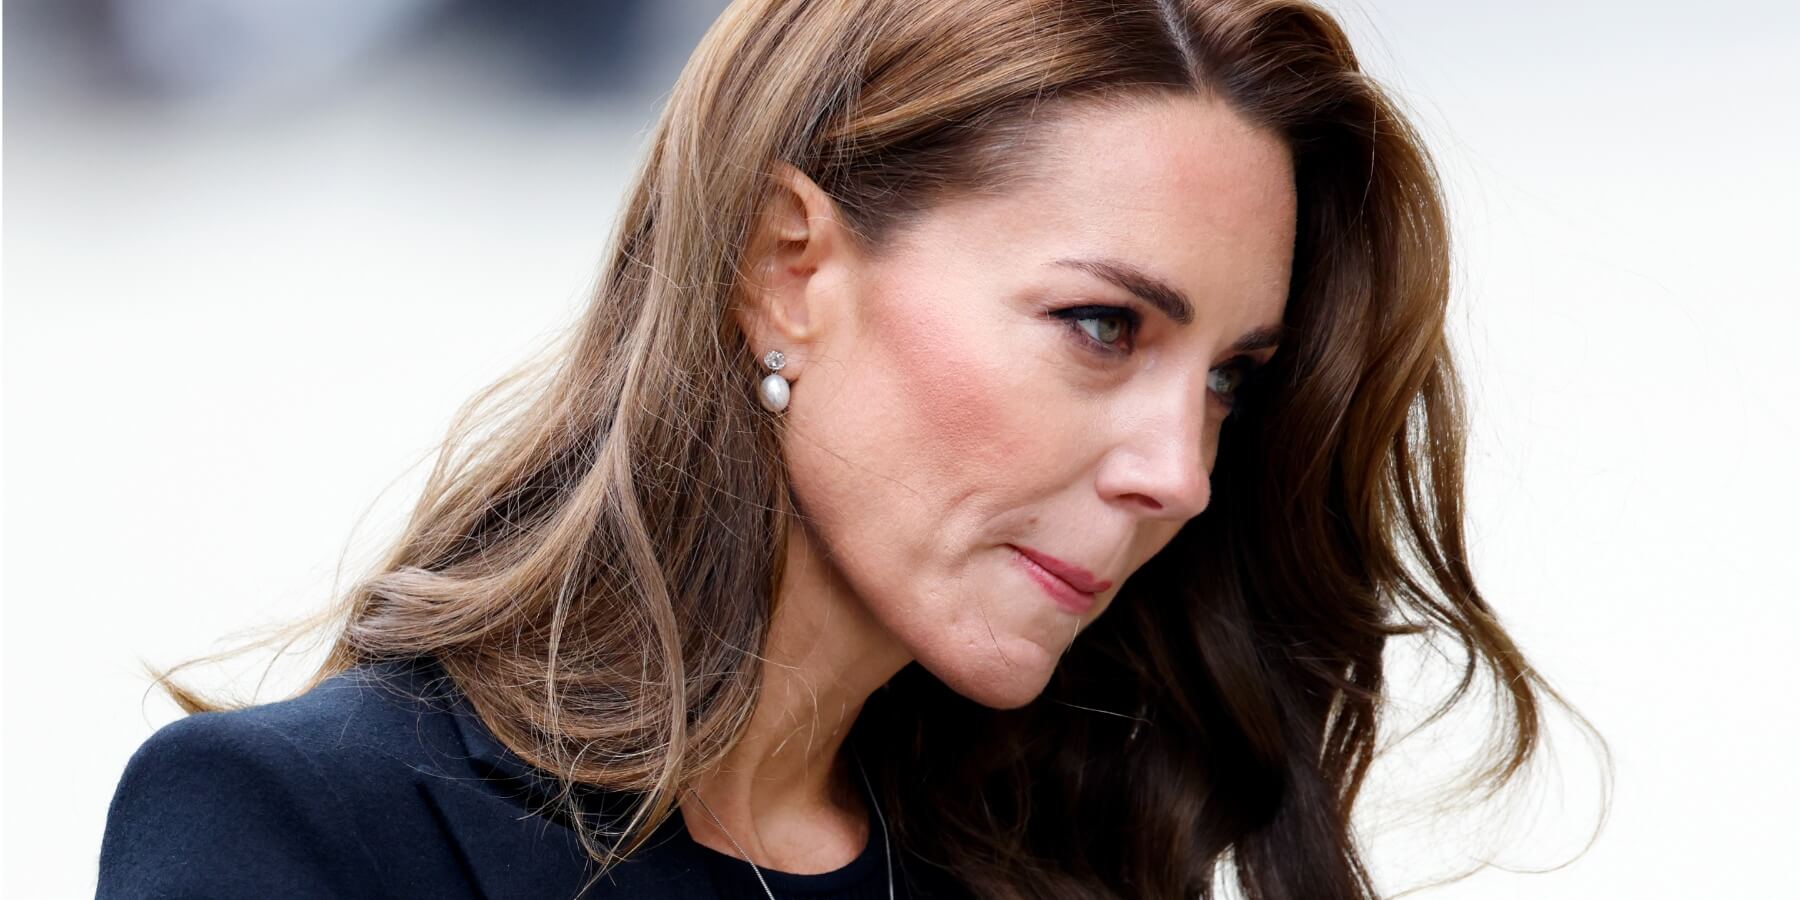 The London Clinic confirmed someone attempted to access Kate Middleton's medical records